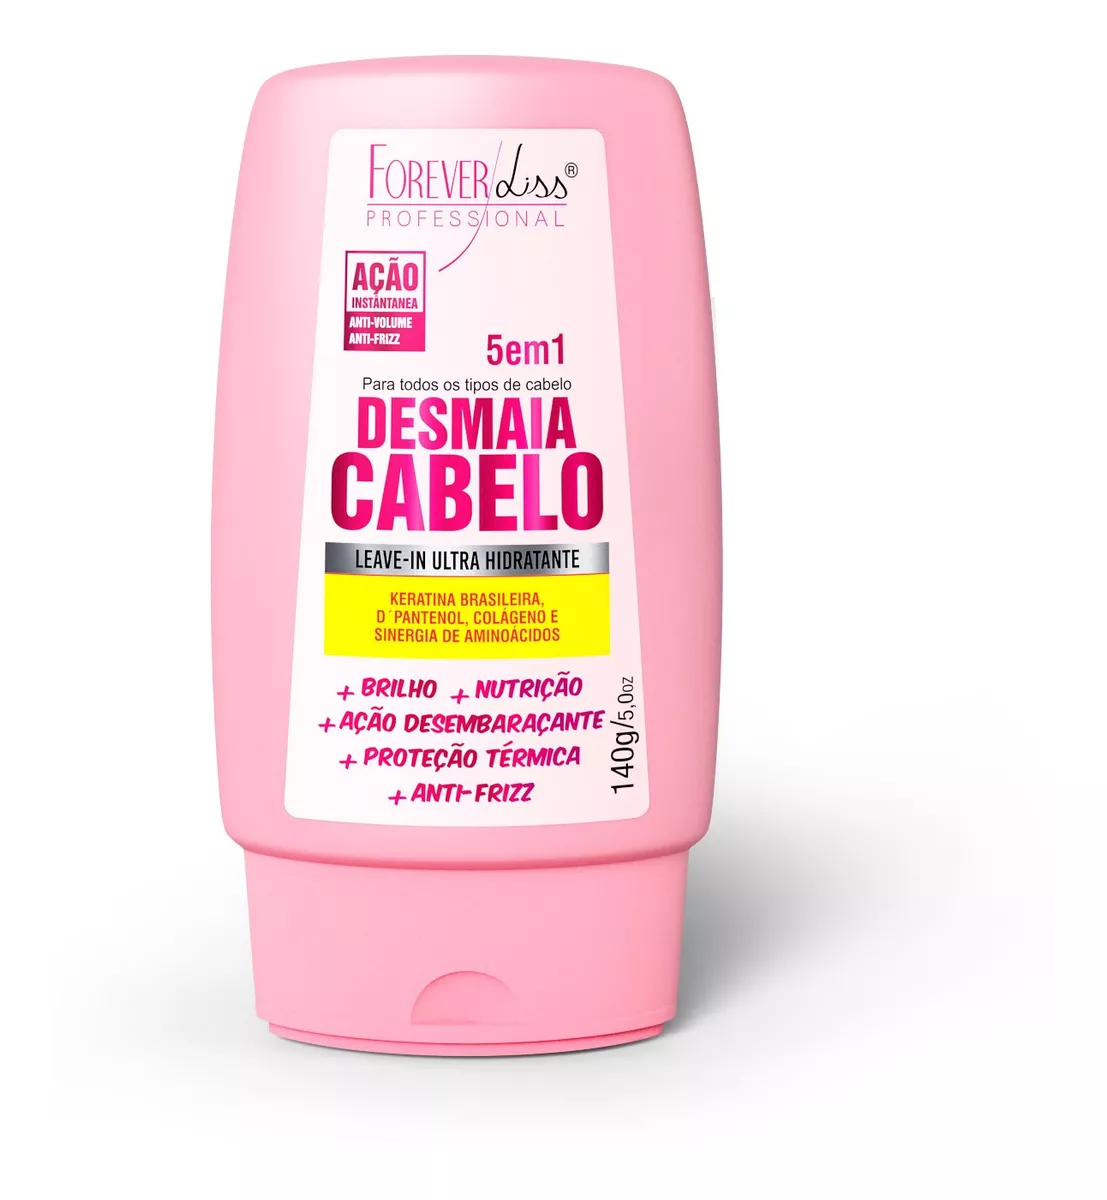 Forever Liss Desmaia Cabelo Leave In Ultra Hidratante 150g